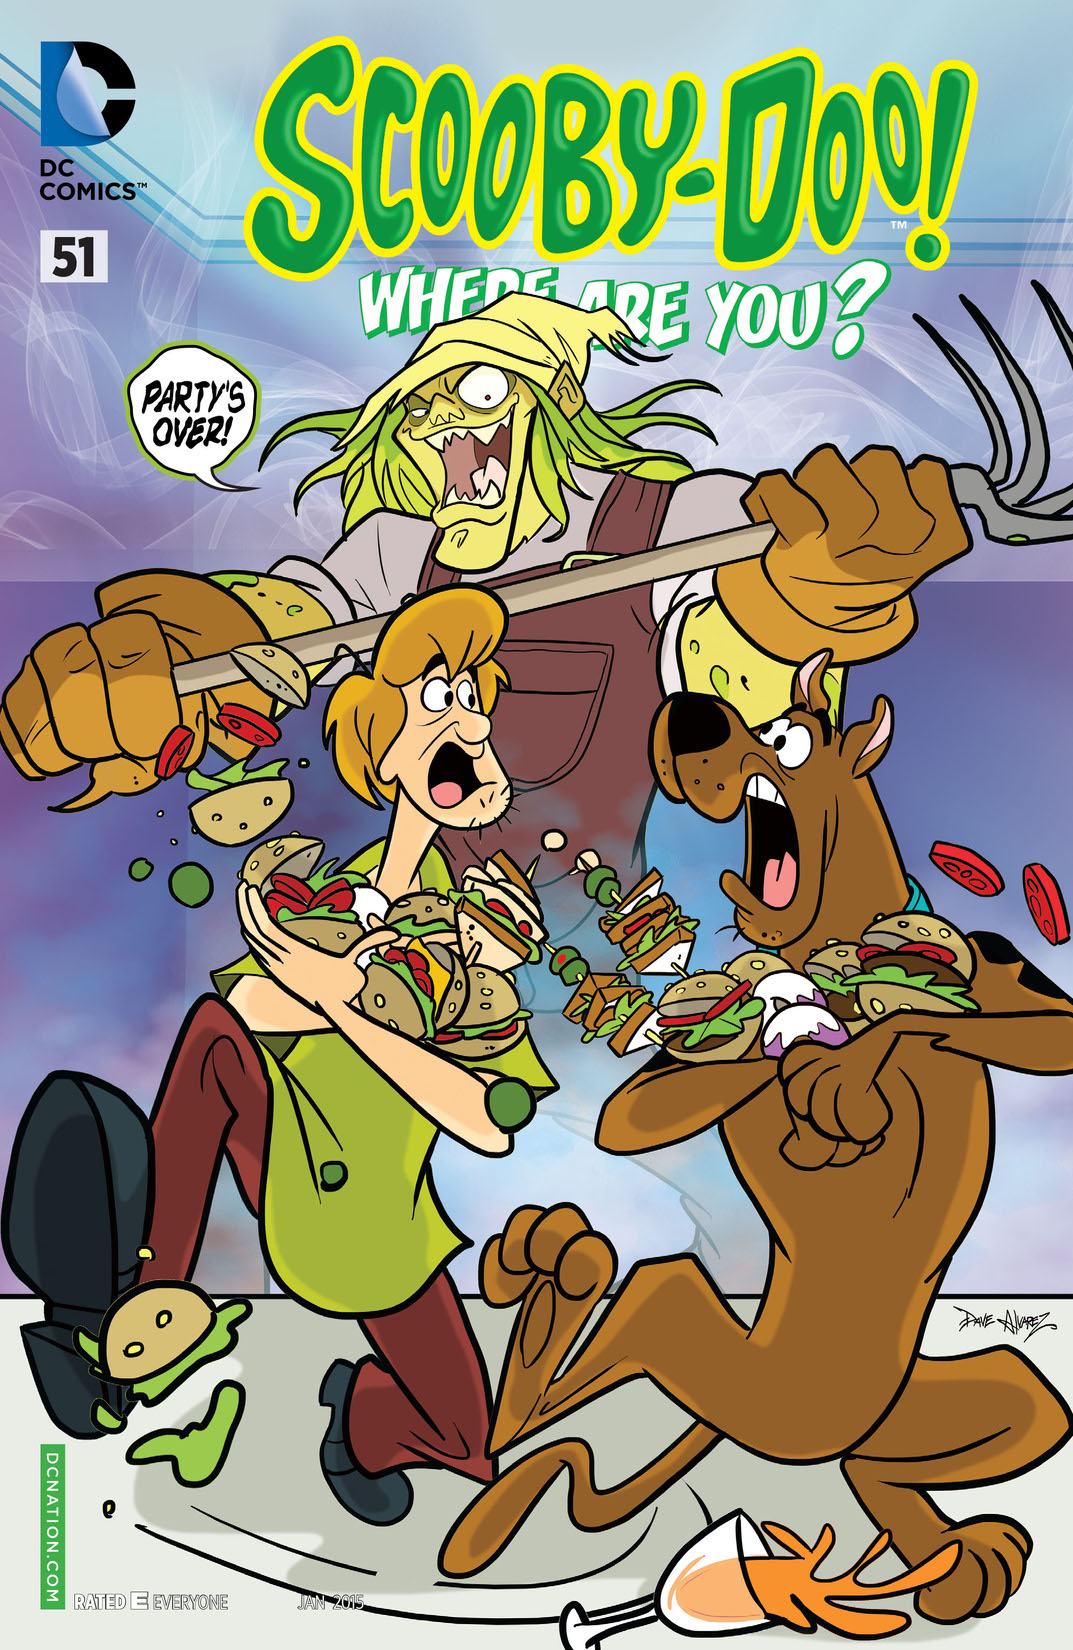 Scooby-Doo, Where Are You? #51 preview images